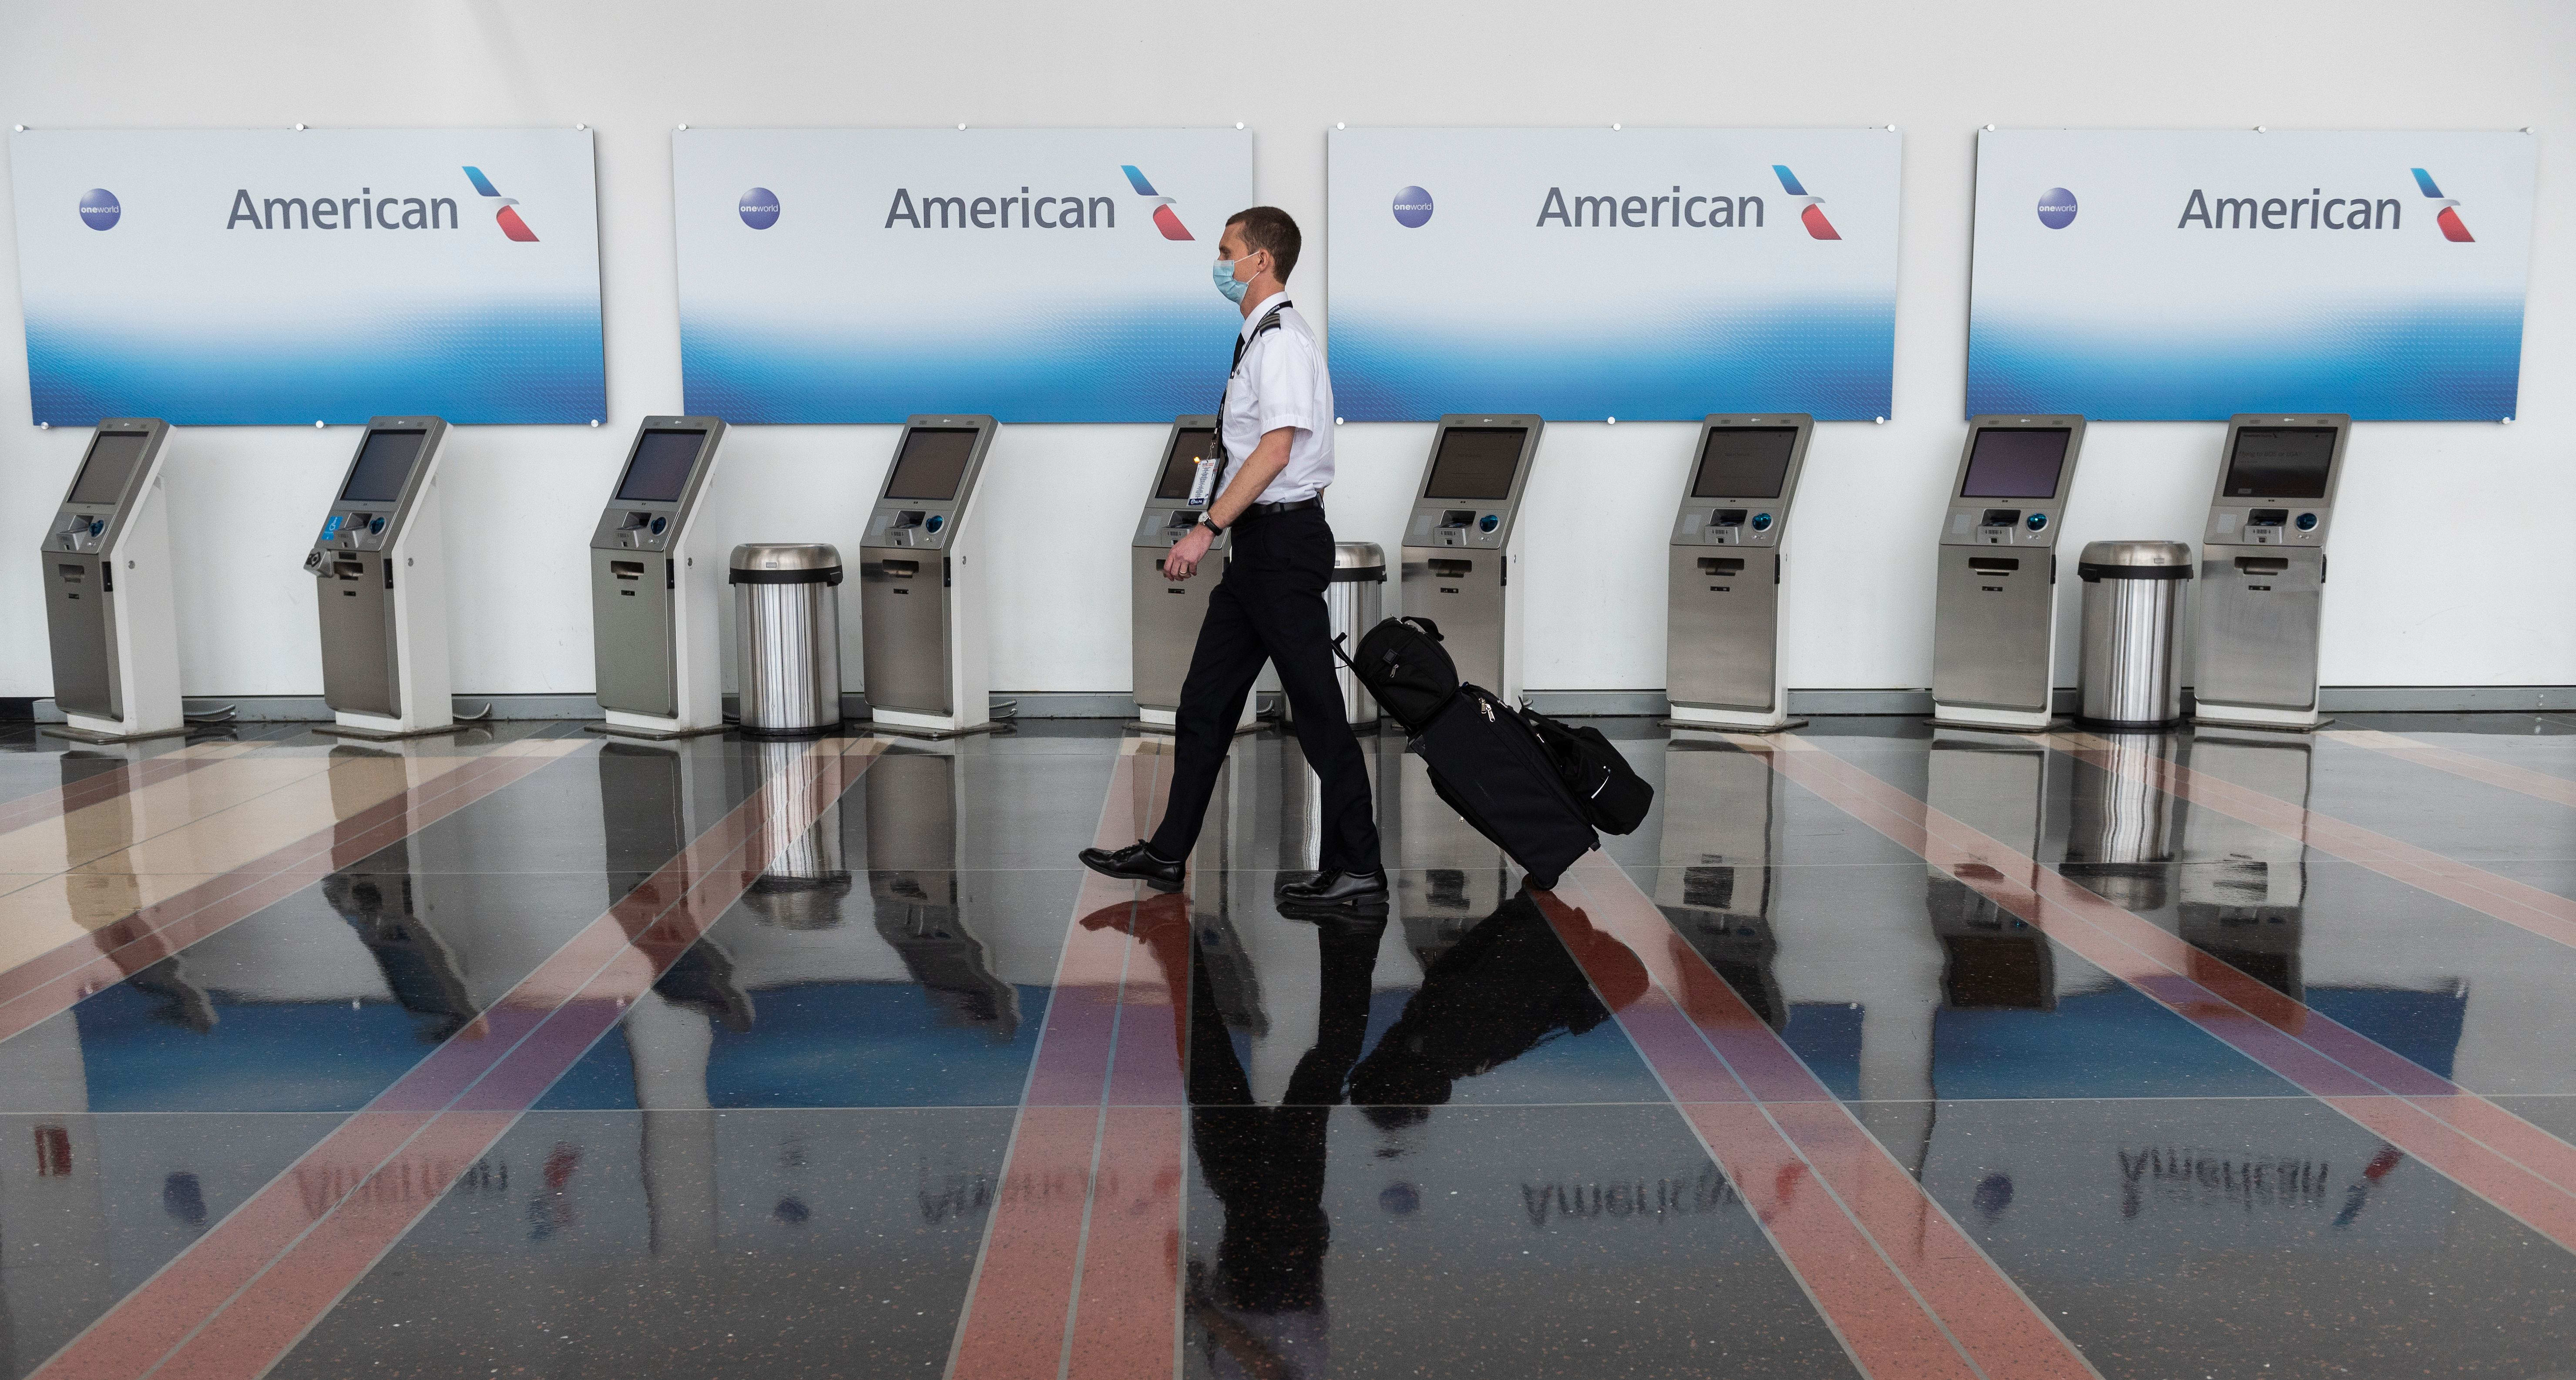 American Airlines offers severance packages to high-level executives